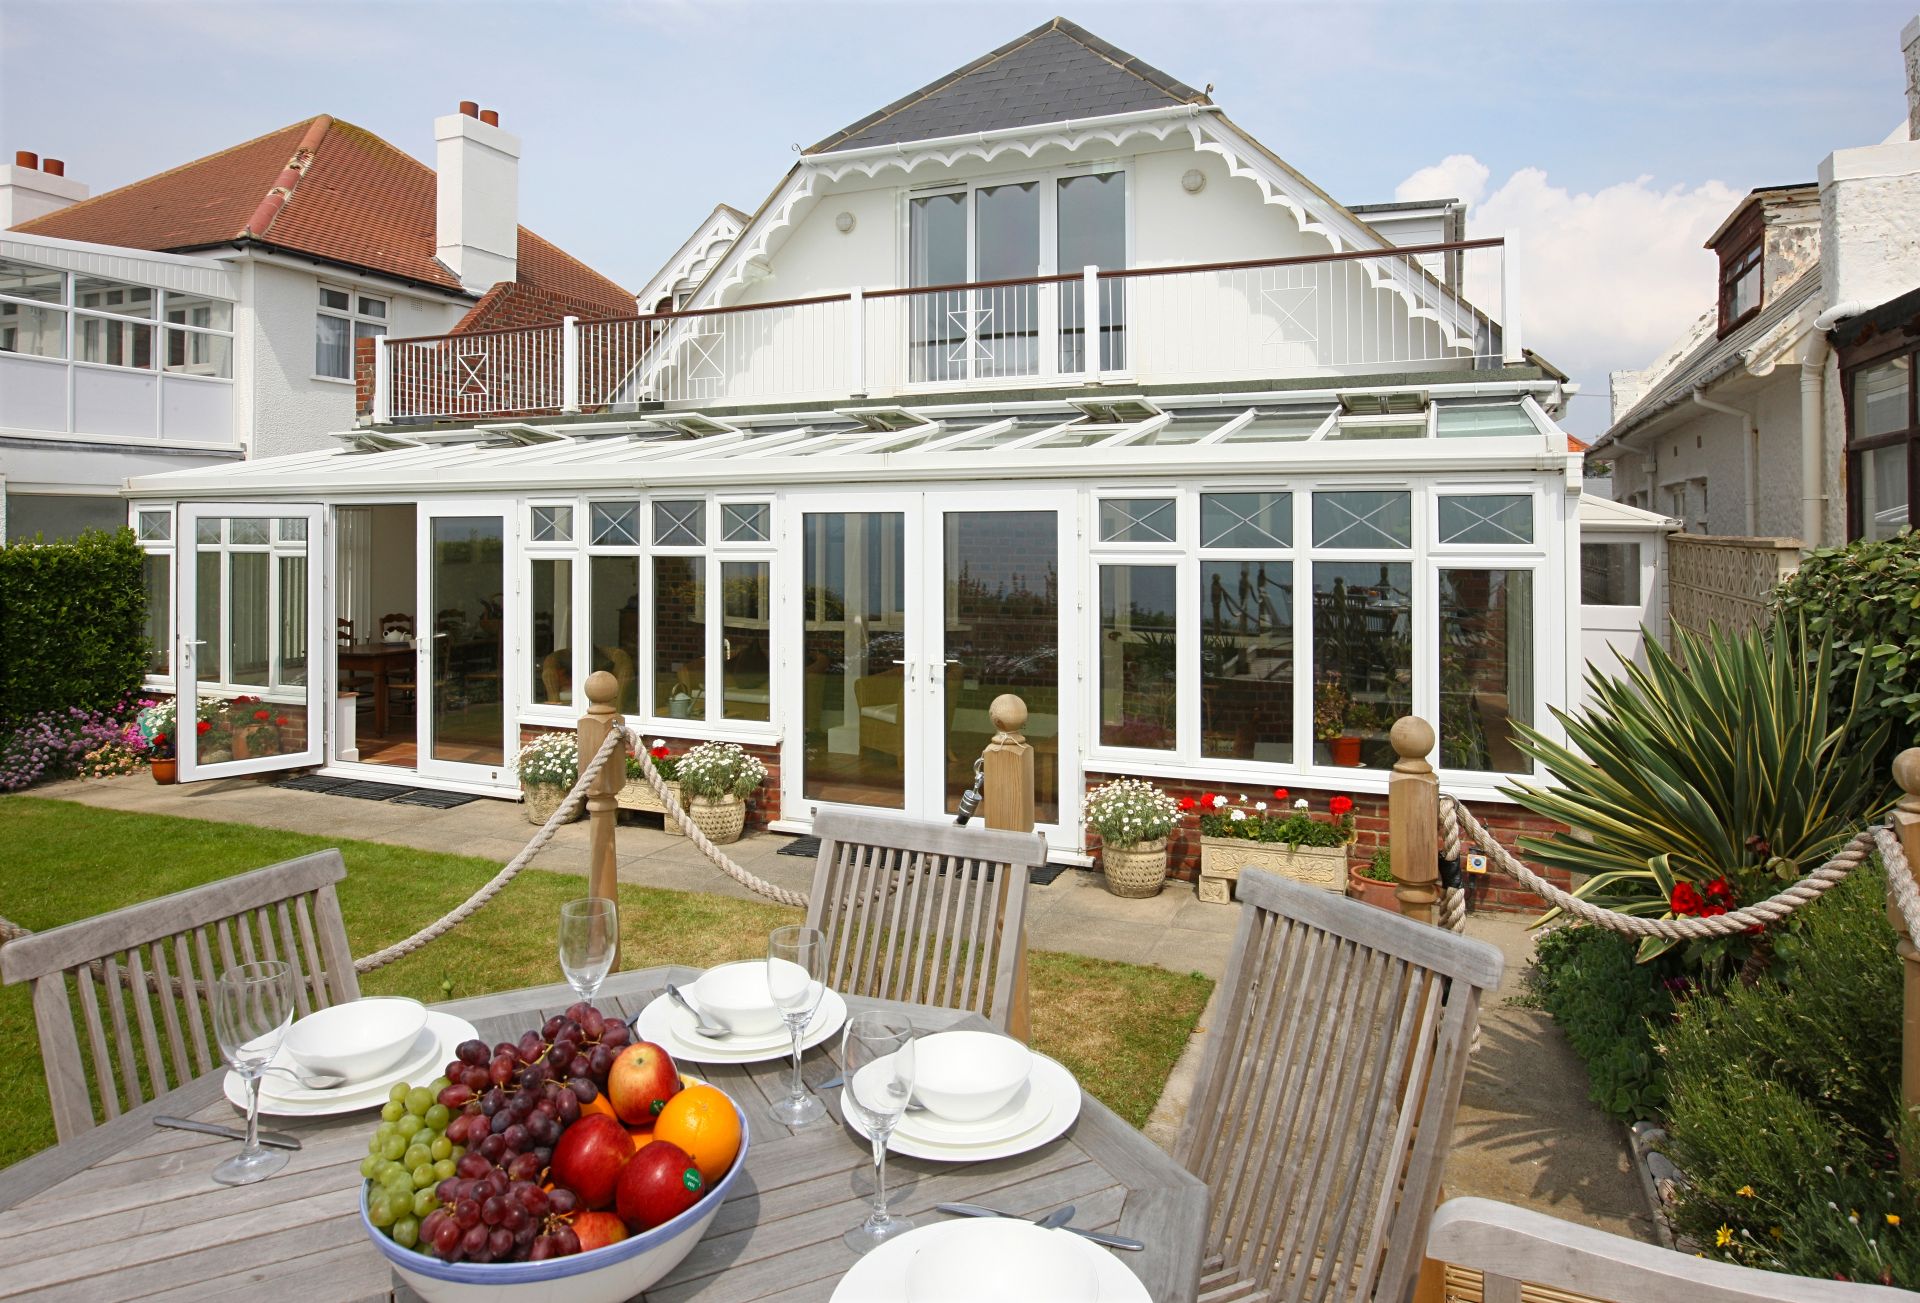 Beach View is located in Bournemouth and surrounding villages